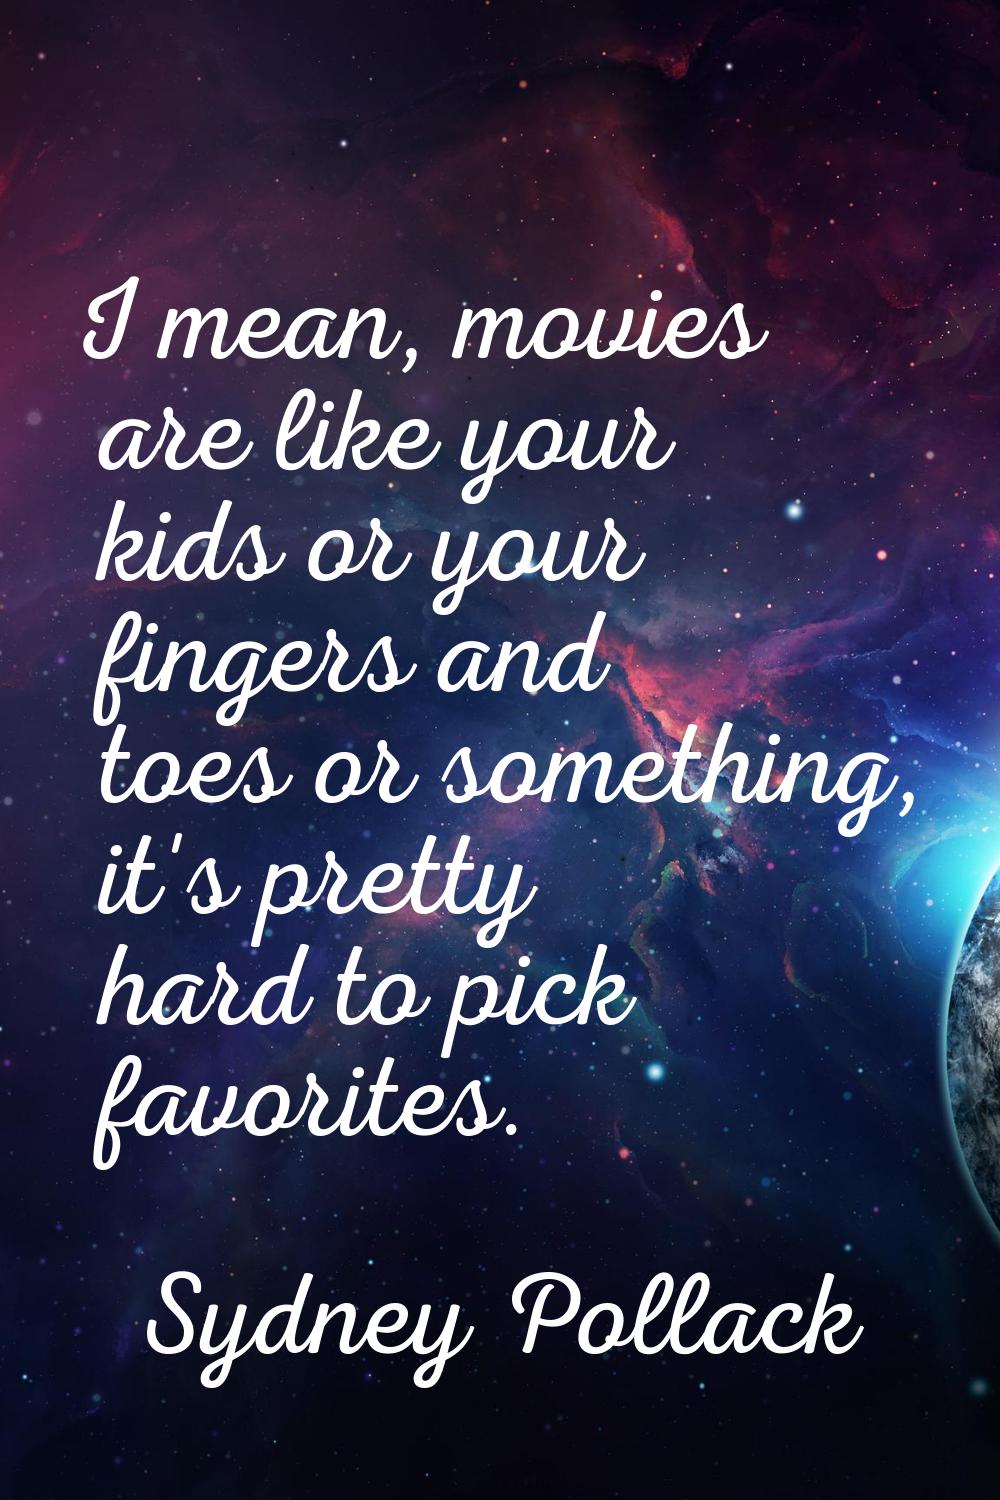 I mean, movies are like your kids or your fingers and toes or something, it's pretty hard to pick f